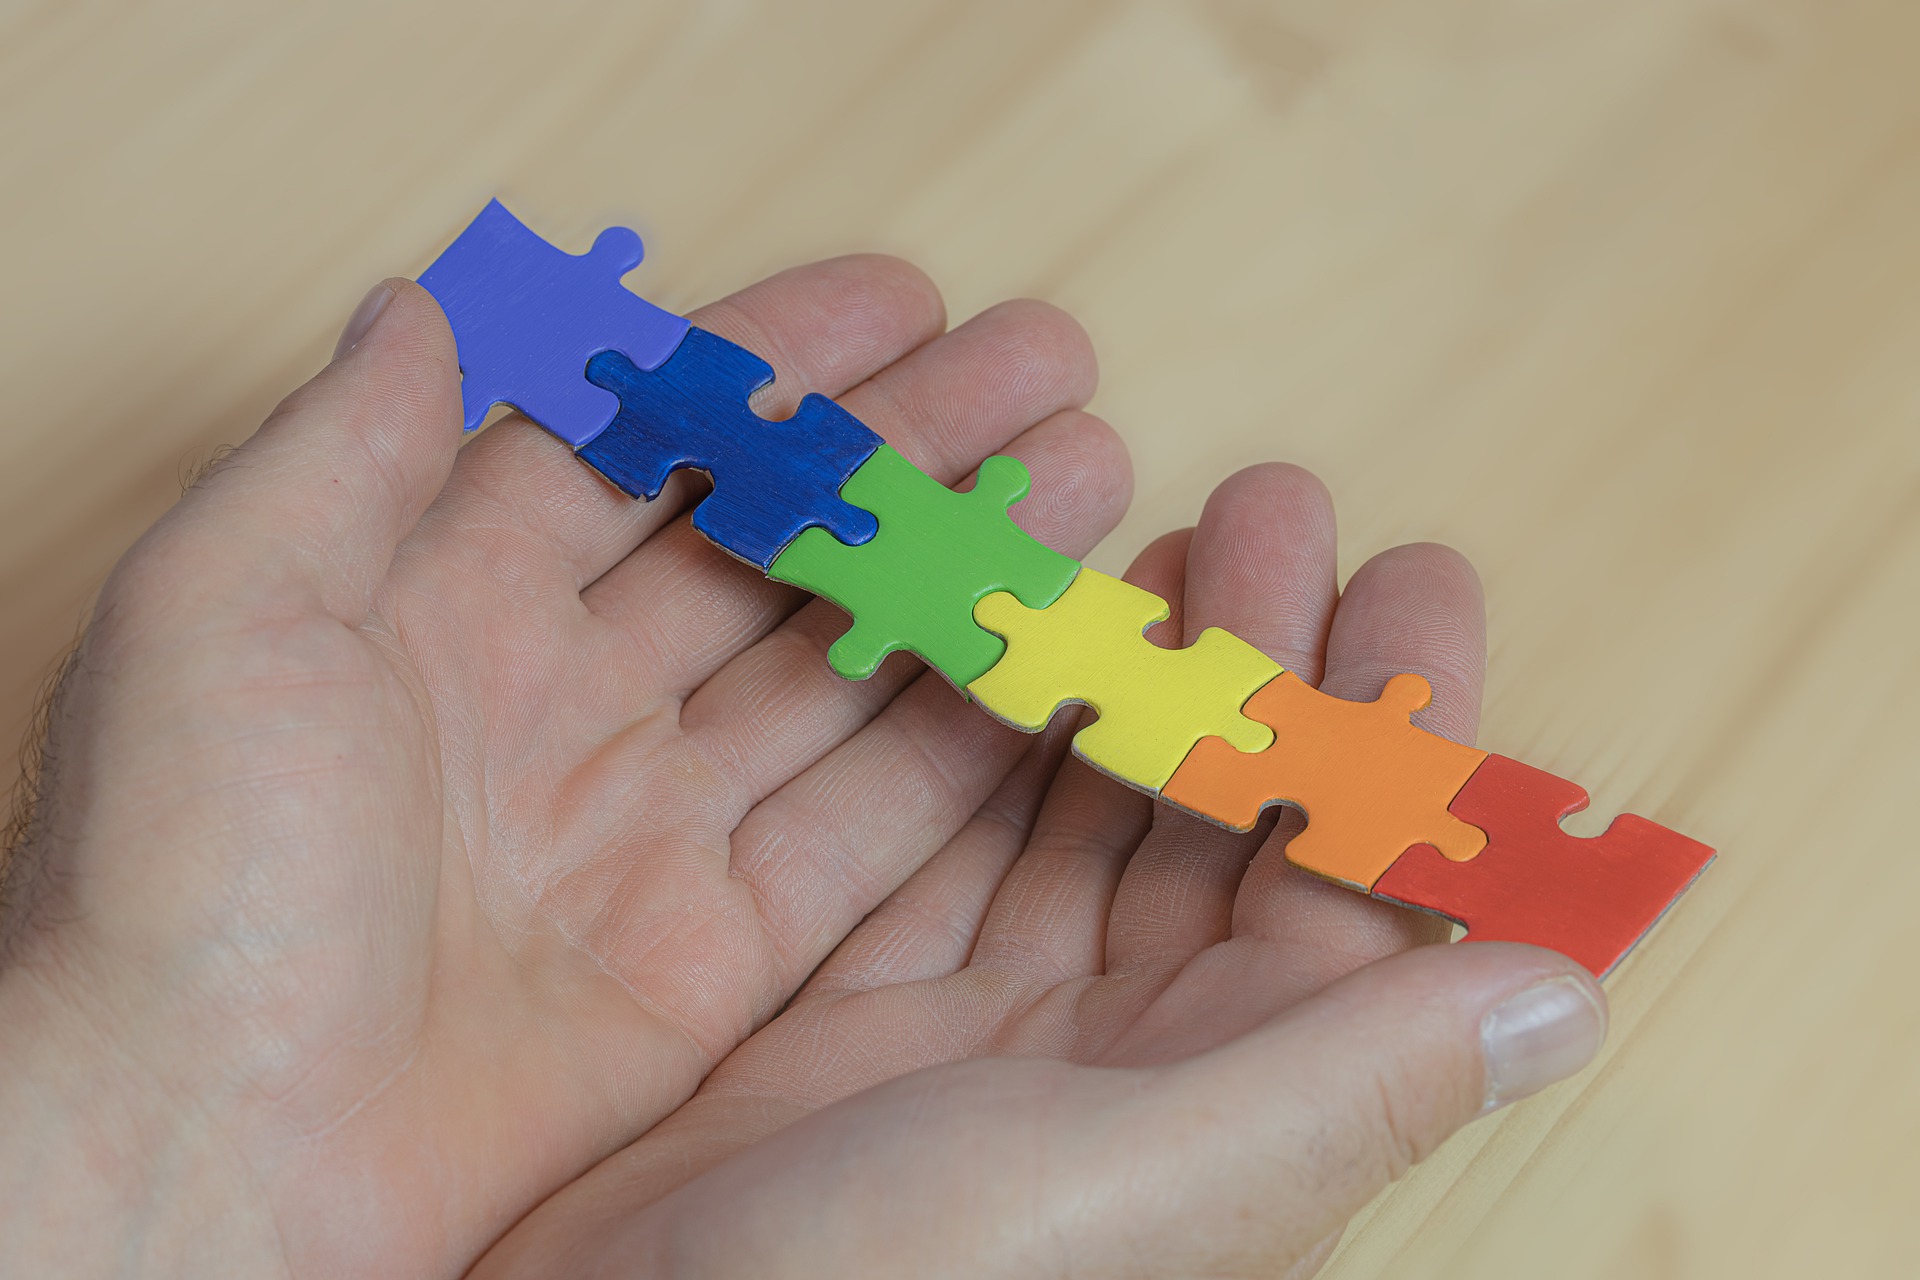 Hands holding rainbow colored puzzle pieces.